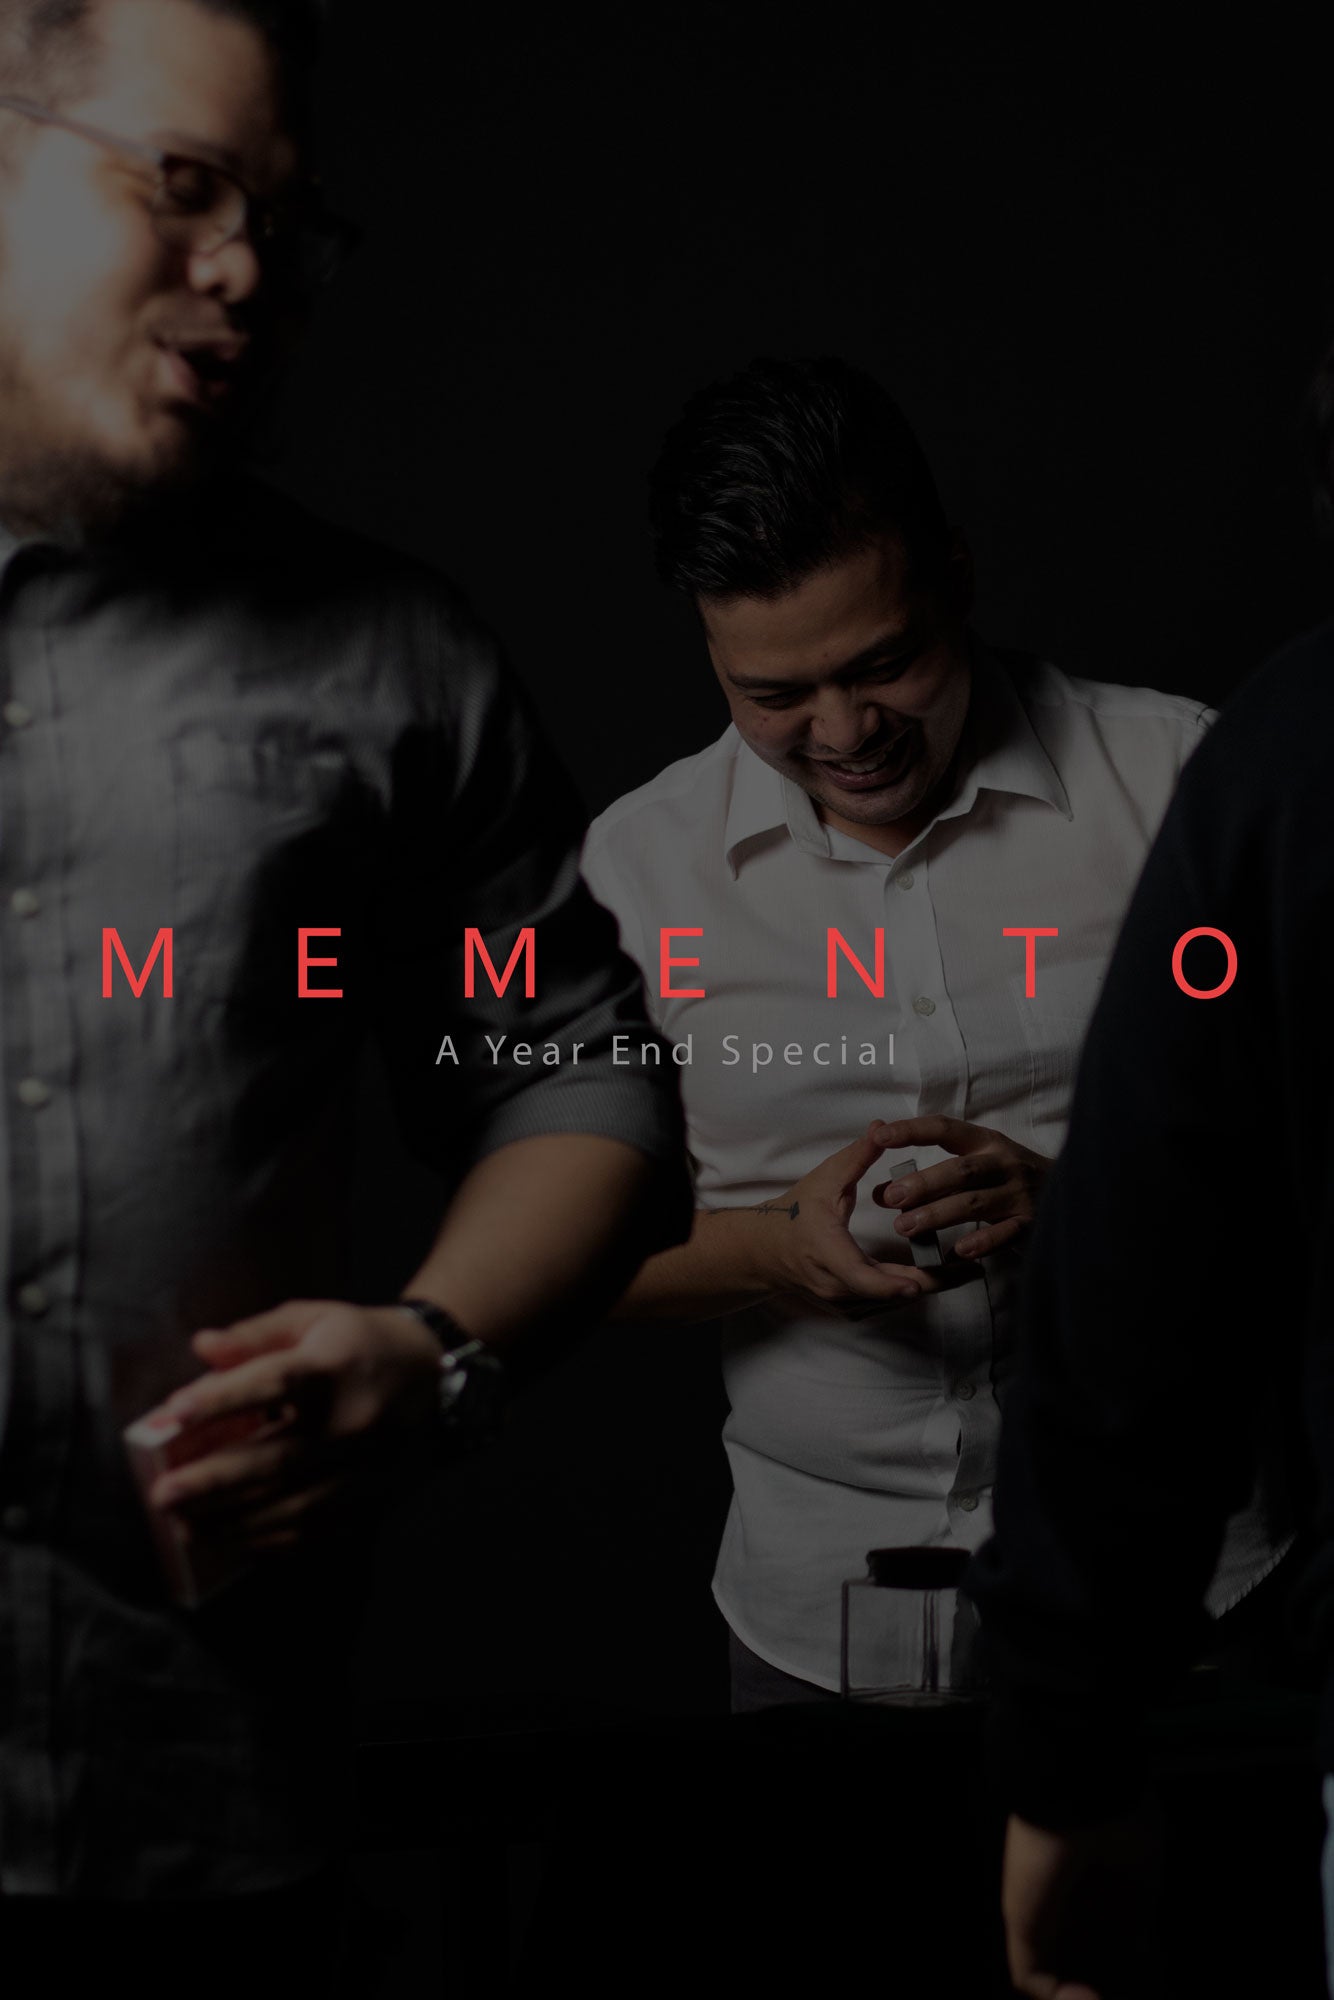 MEMENTO: A Year End Special